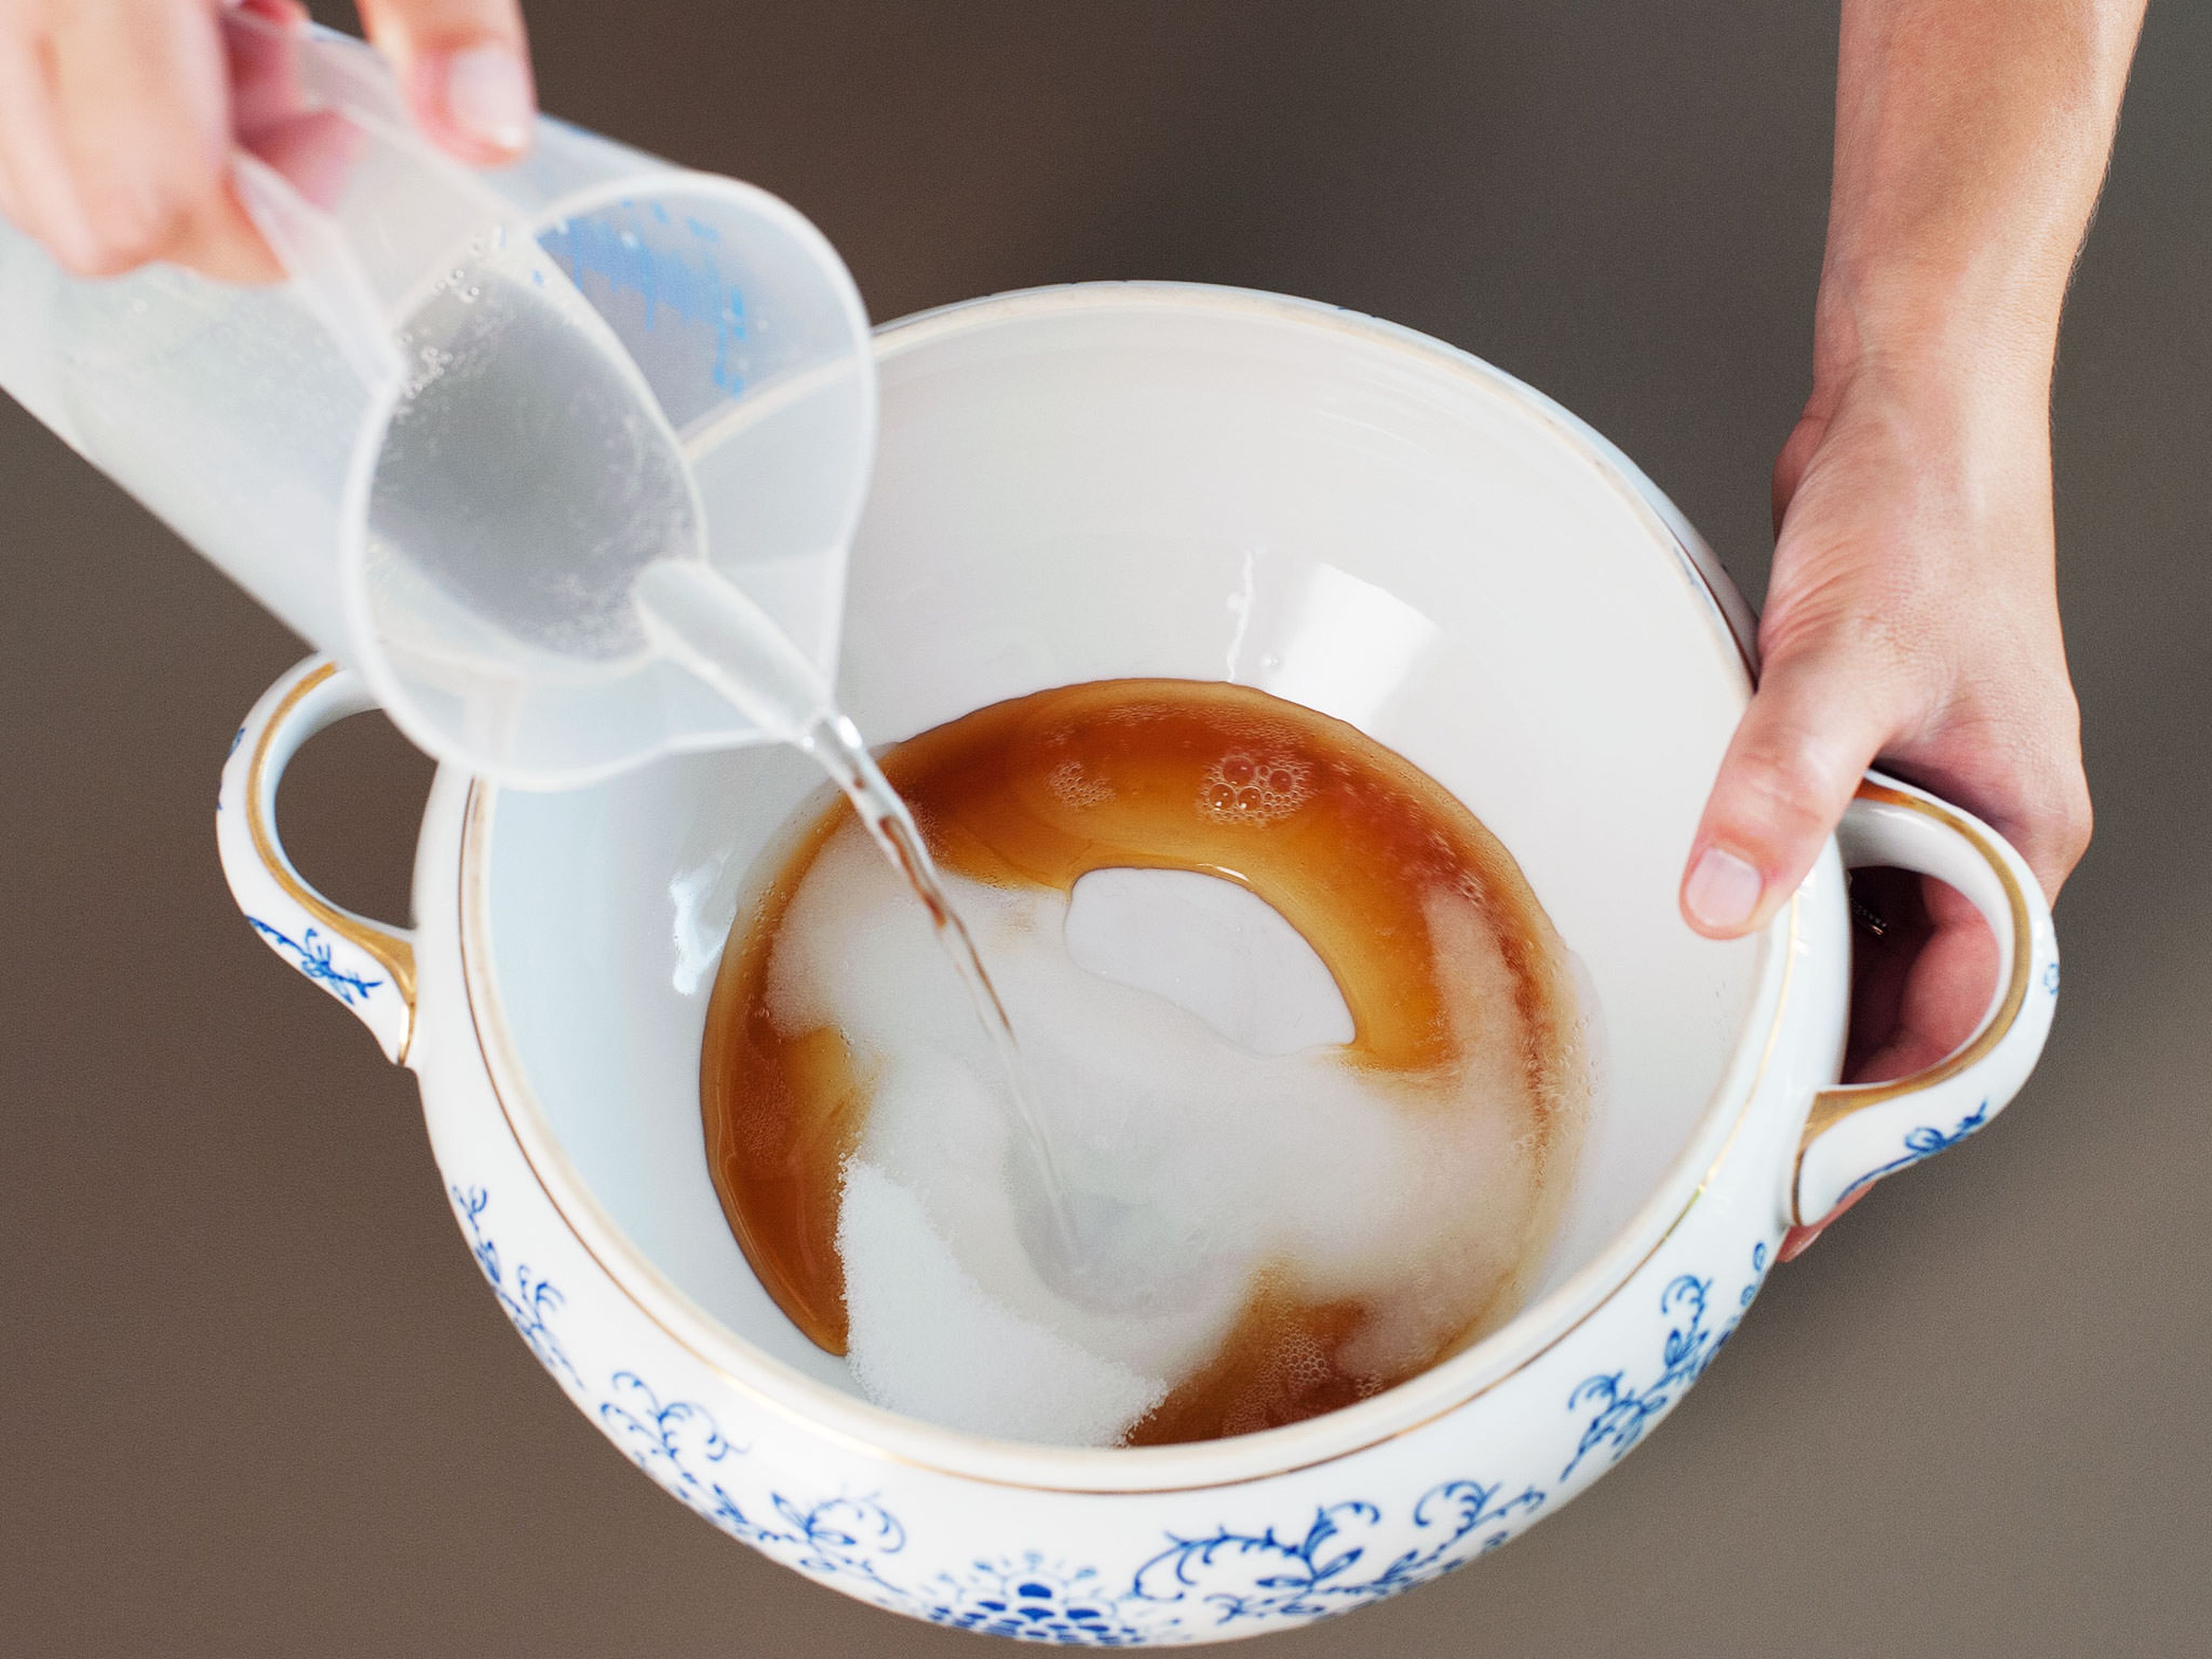 In a large pitcher or bowl, combine sugar, maple syrup, and sparkling water until sugar is dissolved.